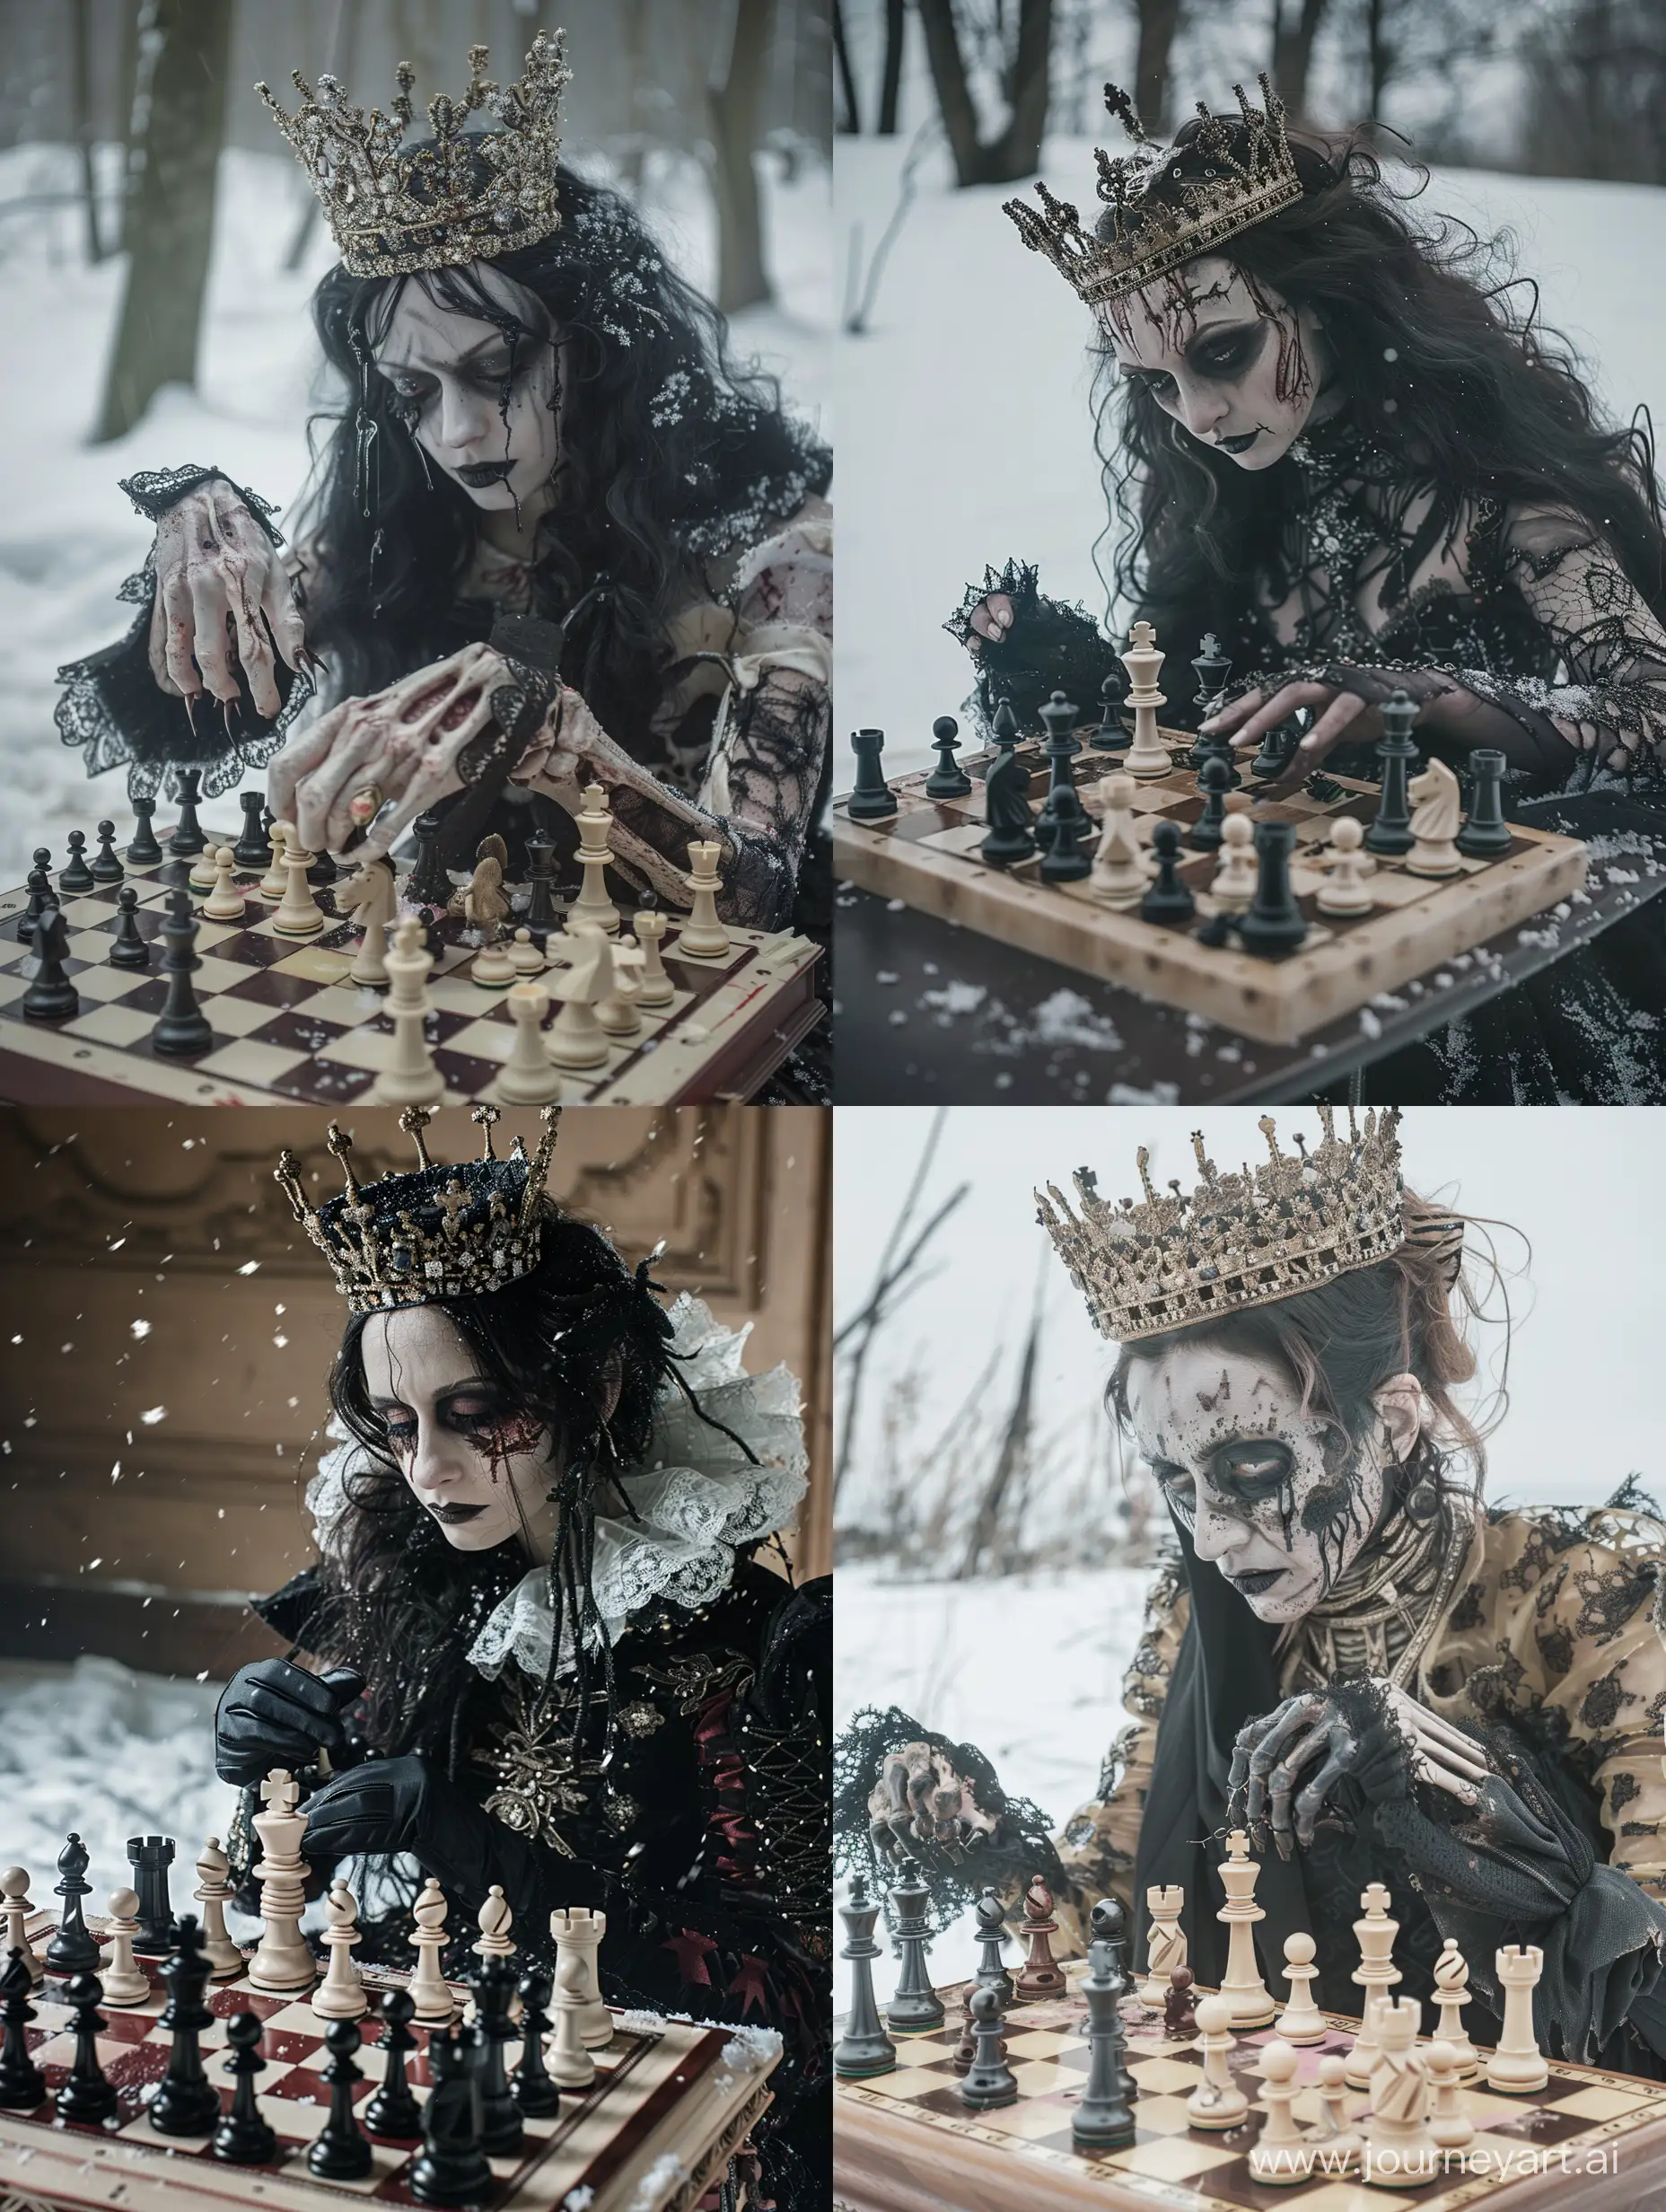 a woman wearing a crown playing chess in the snow, tattered gothic horror maiden, fashion editorial photography, sadistic, in thick layers of rhythms, bone and ivory, killer queen, pale light, stately, inspired by Lise
Deharme, gothic art, behance